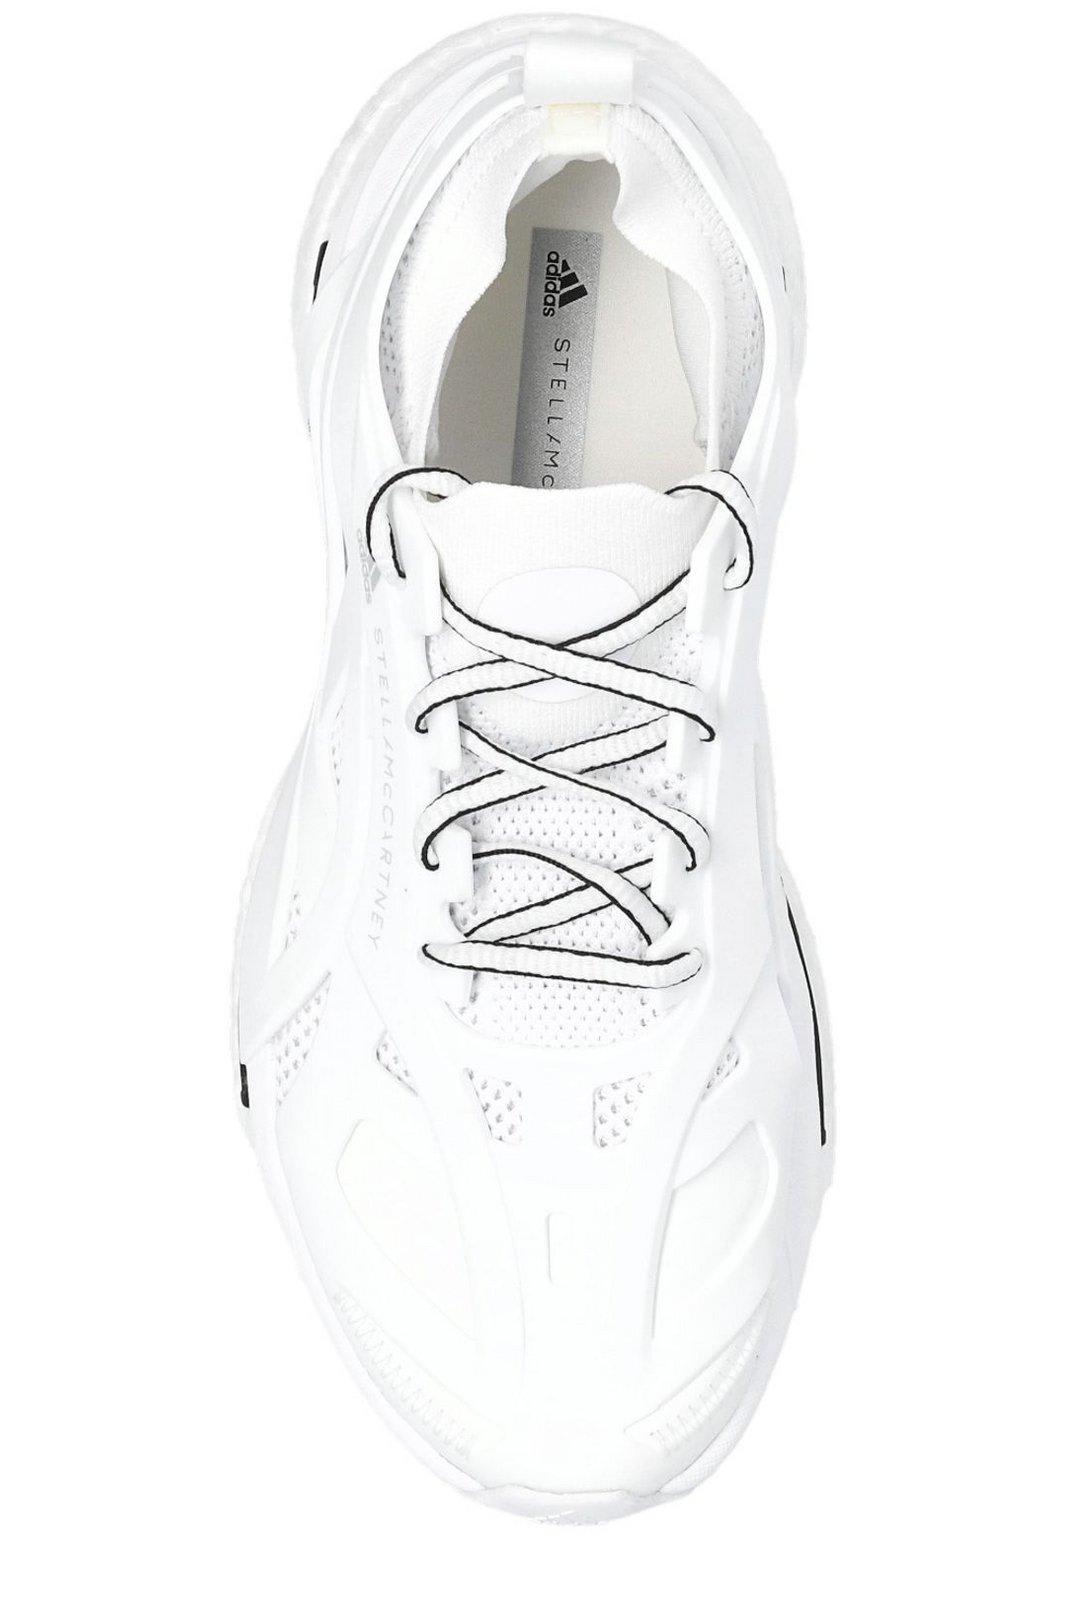 Shop Adidas By Stella Mccartney Solarglide Sneakers